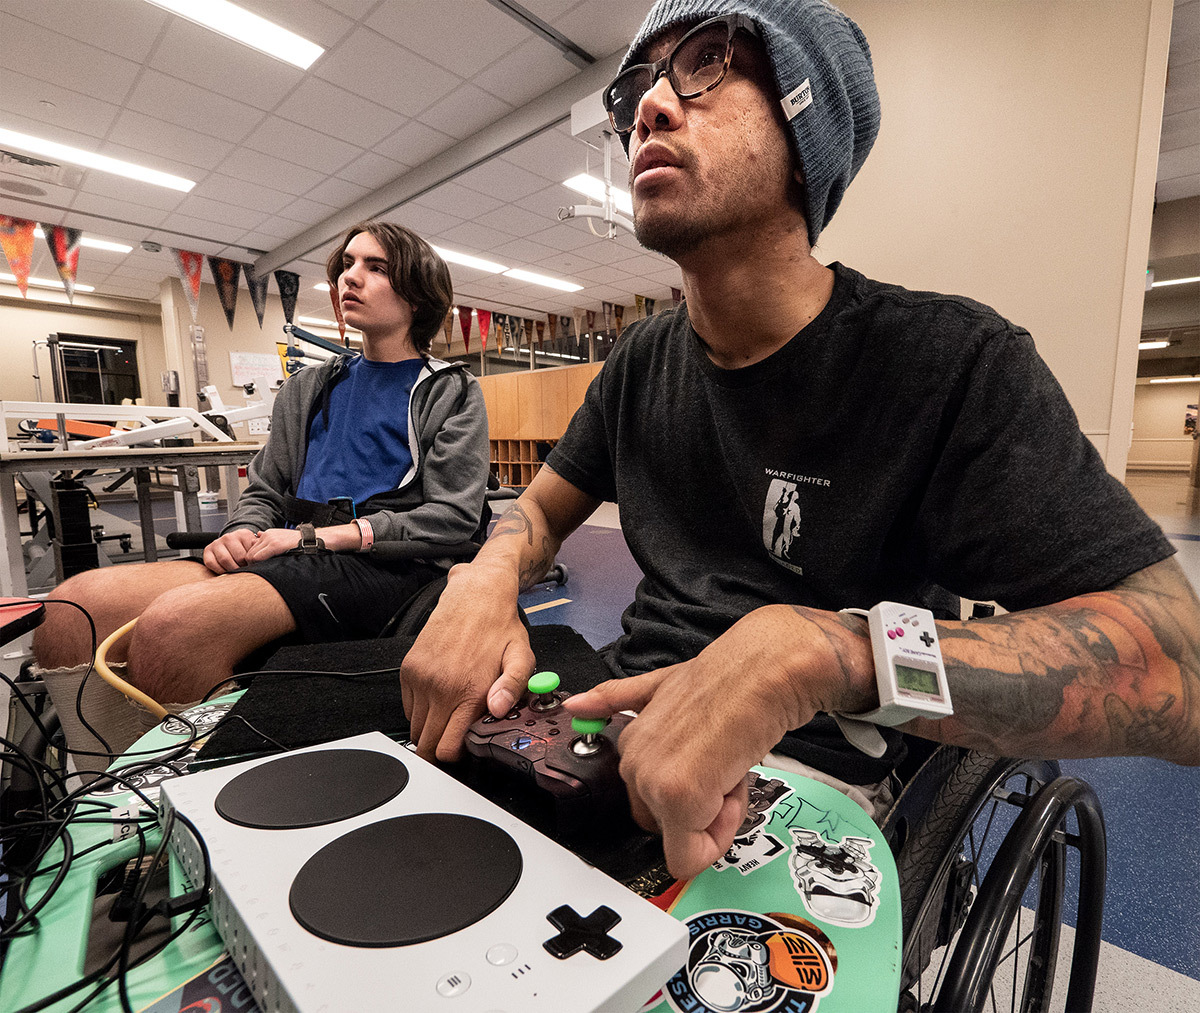 Patient Jonah Karpman, left, watches as Mike Luckett of Warfighter Engaged plays during Craig Hospital's gaming night.